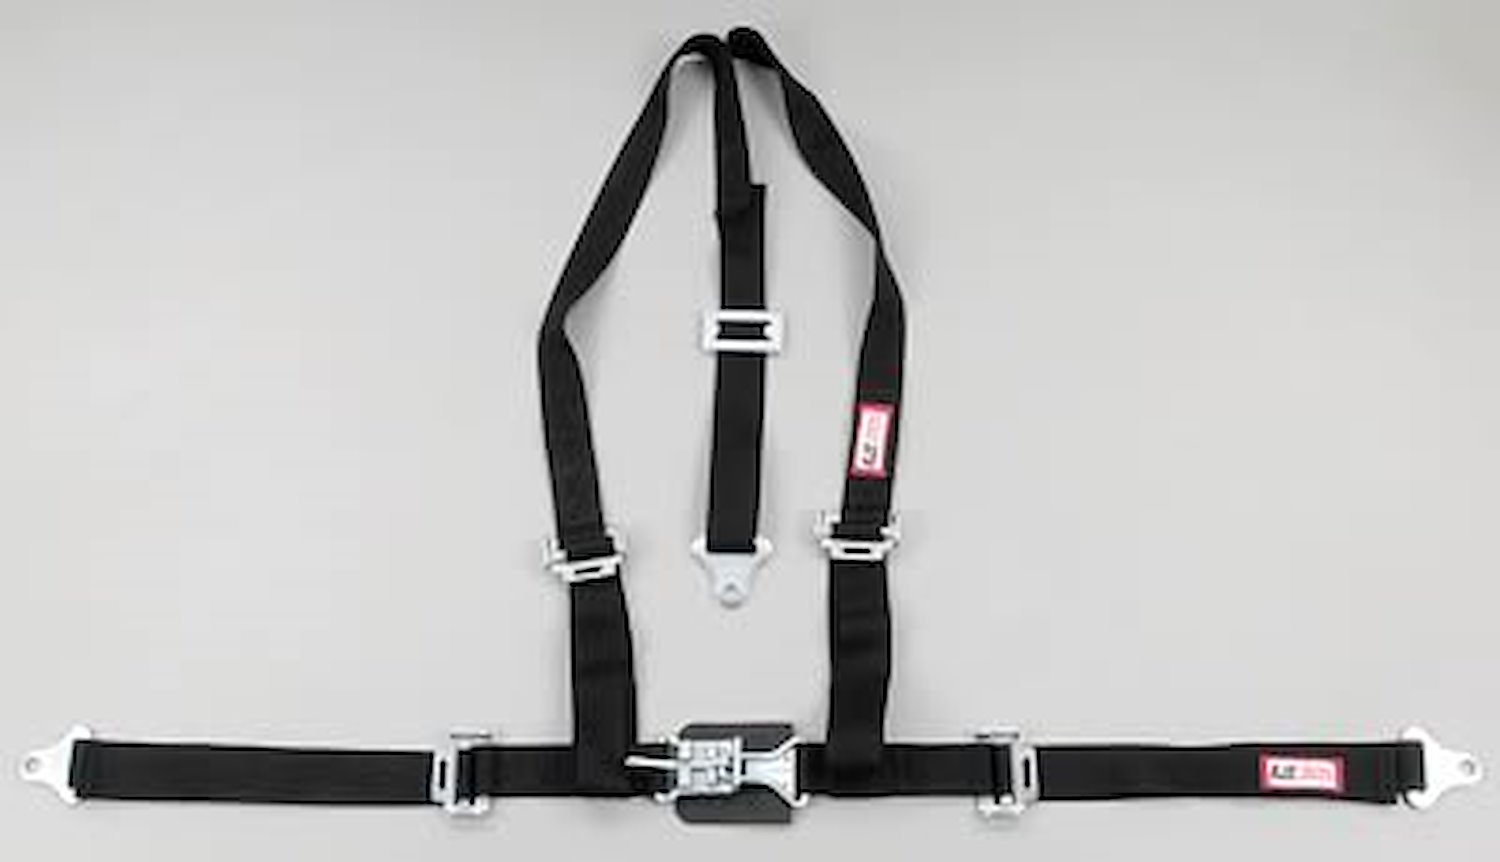 NON-SFI L&L HARNESS 2 PULL UP Lap Belt SEWN IN 2 S.H. V ROLL BAR Mount ALL WRAP ENDS BLUE